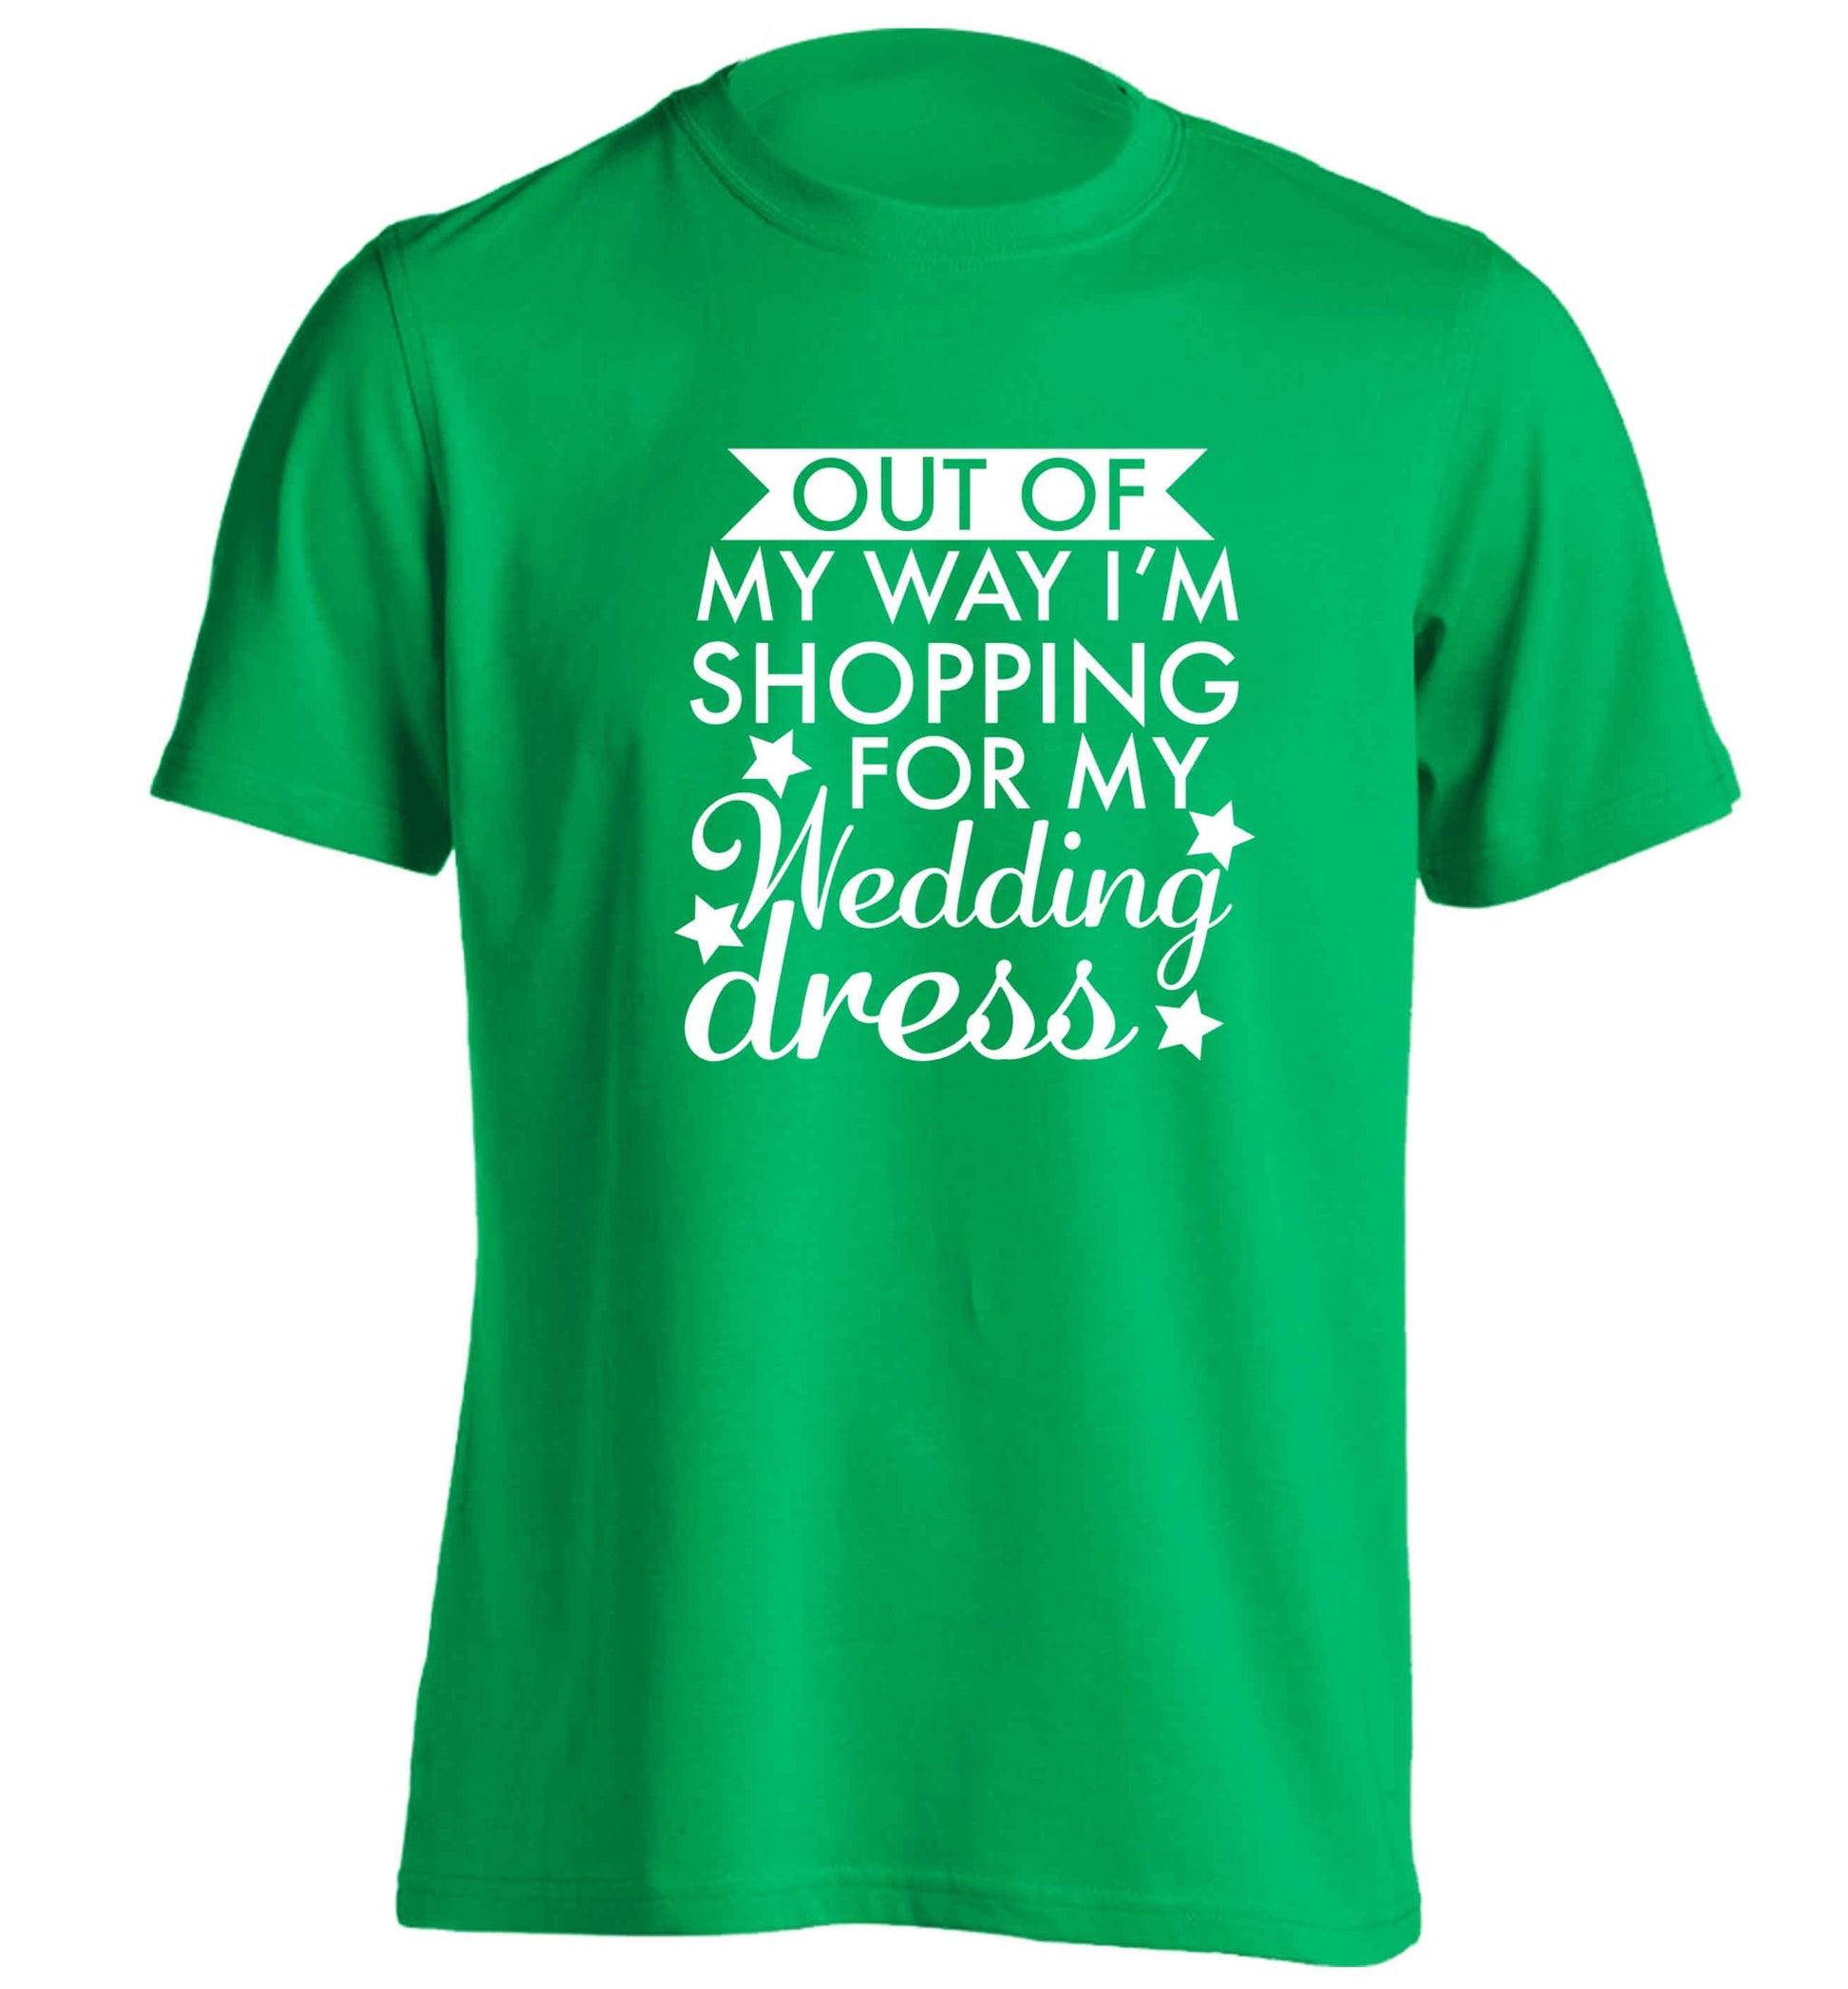 Out of my way I'm shopping for my wedding dress adults unisex green Tshirt 2XL